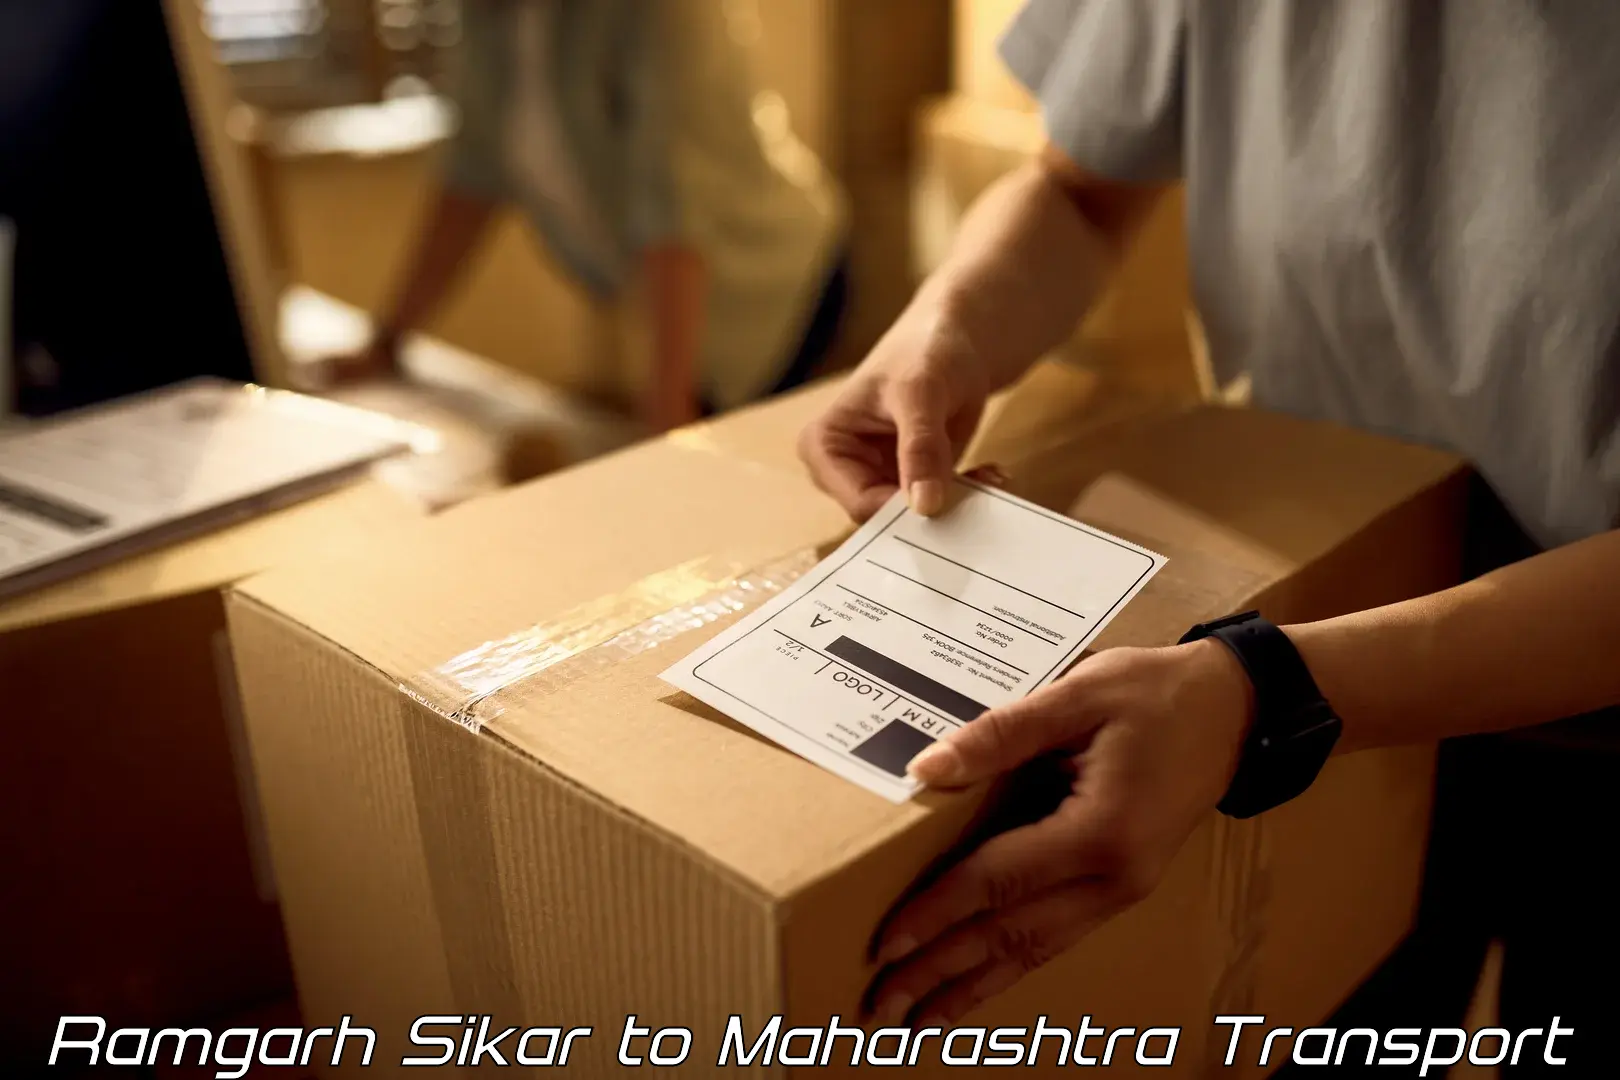 Nationwide transport services Ramgarh Sikar to Symbiosis International Pune